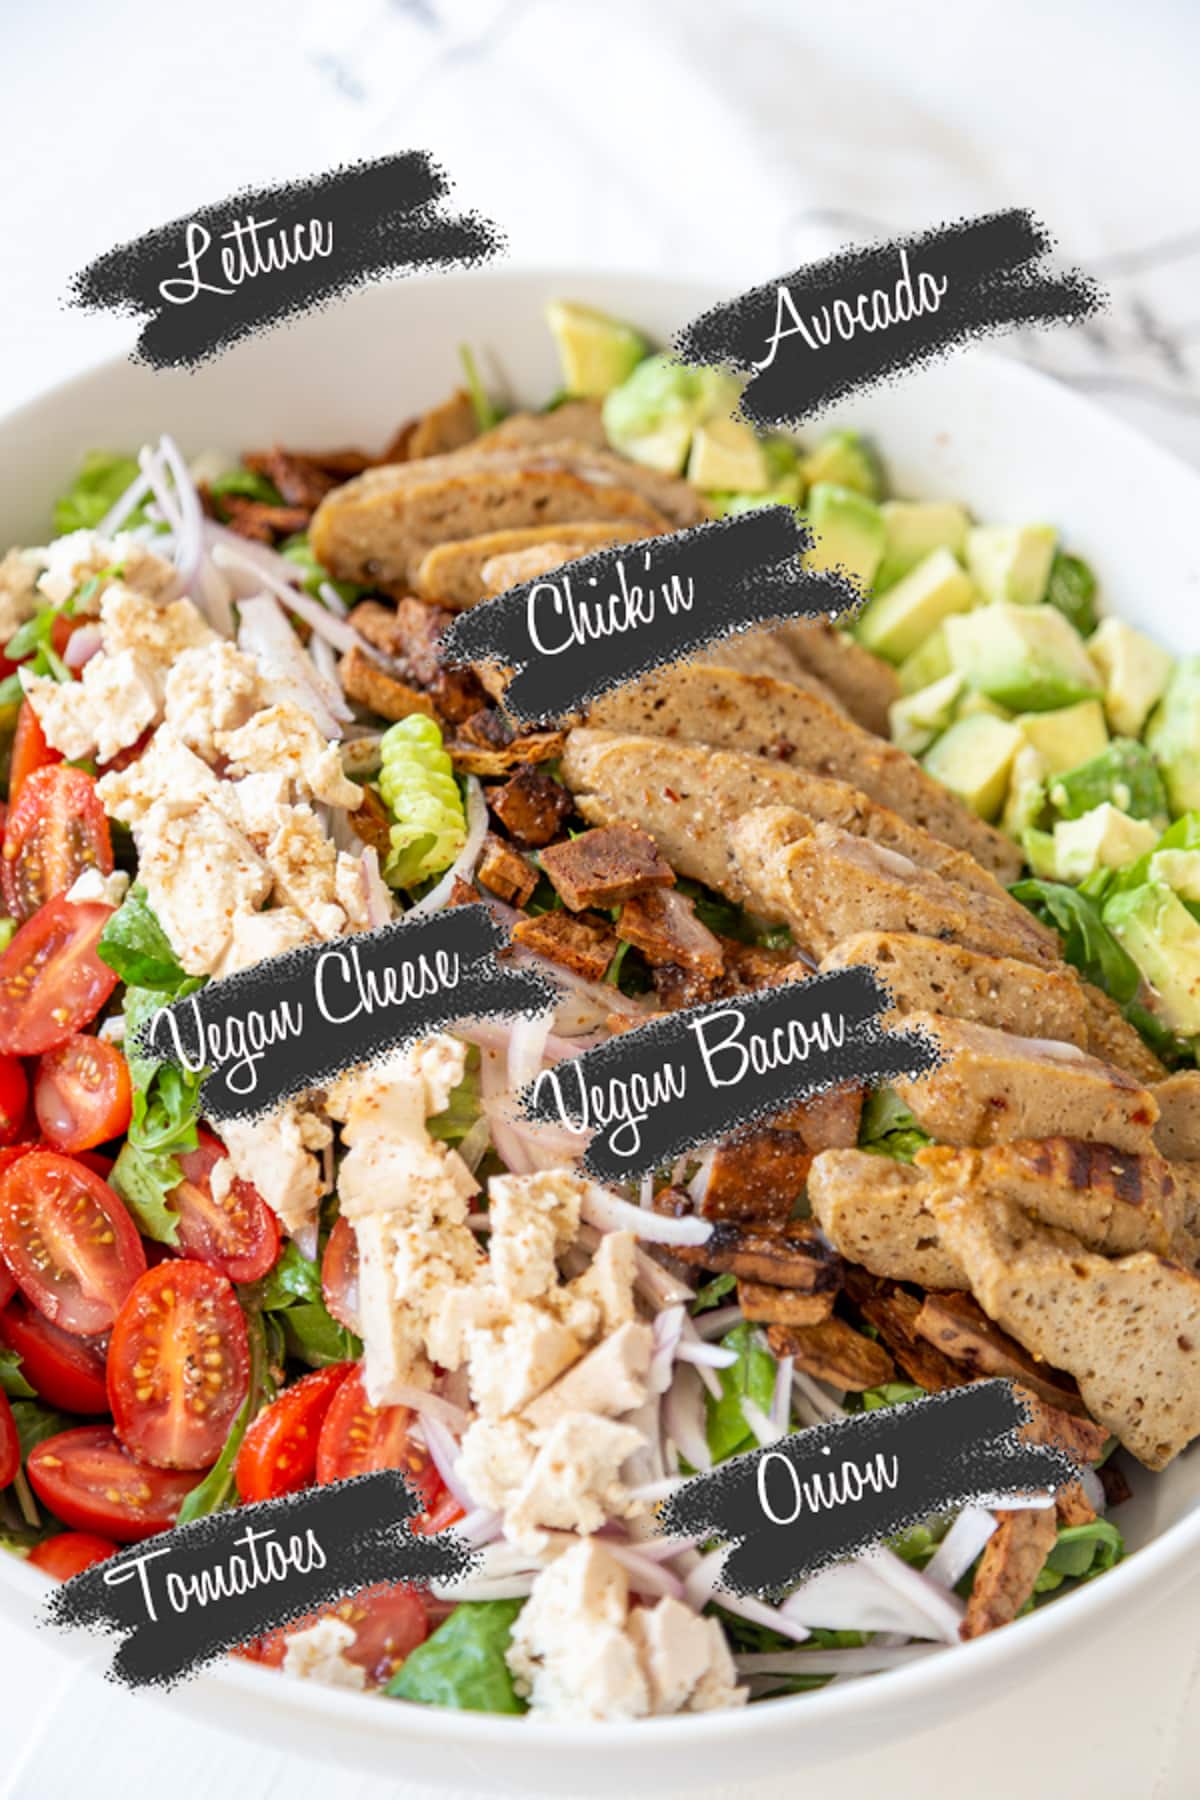 A picture of a Cobb salad with the ingredients labeled.